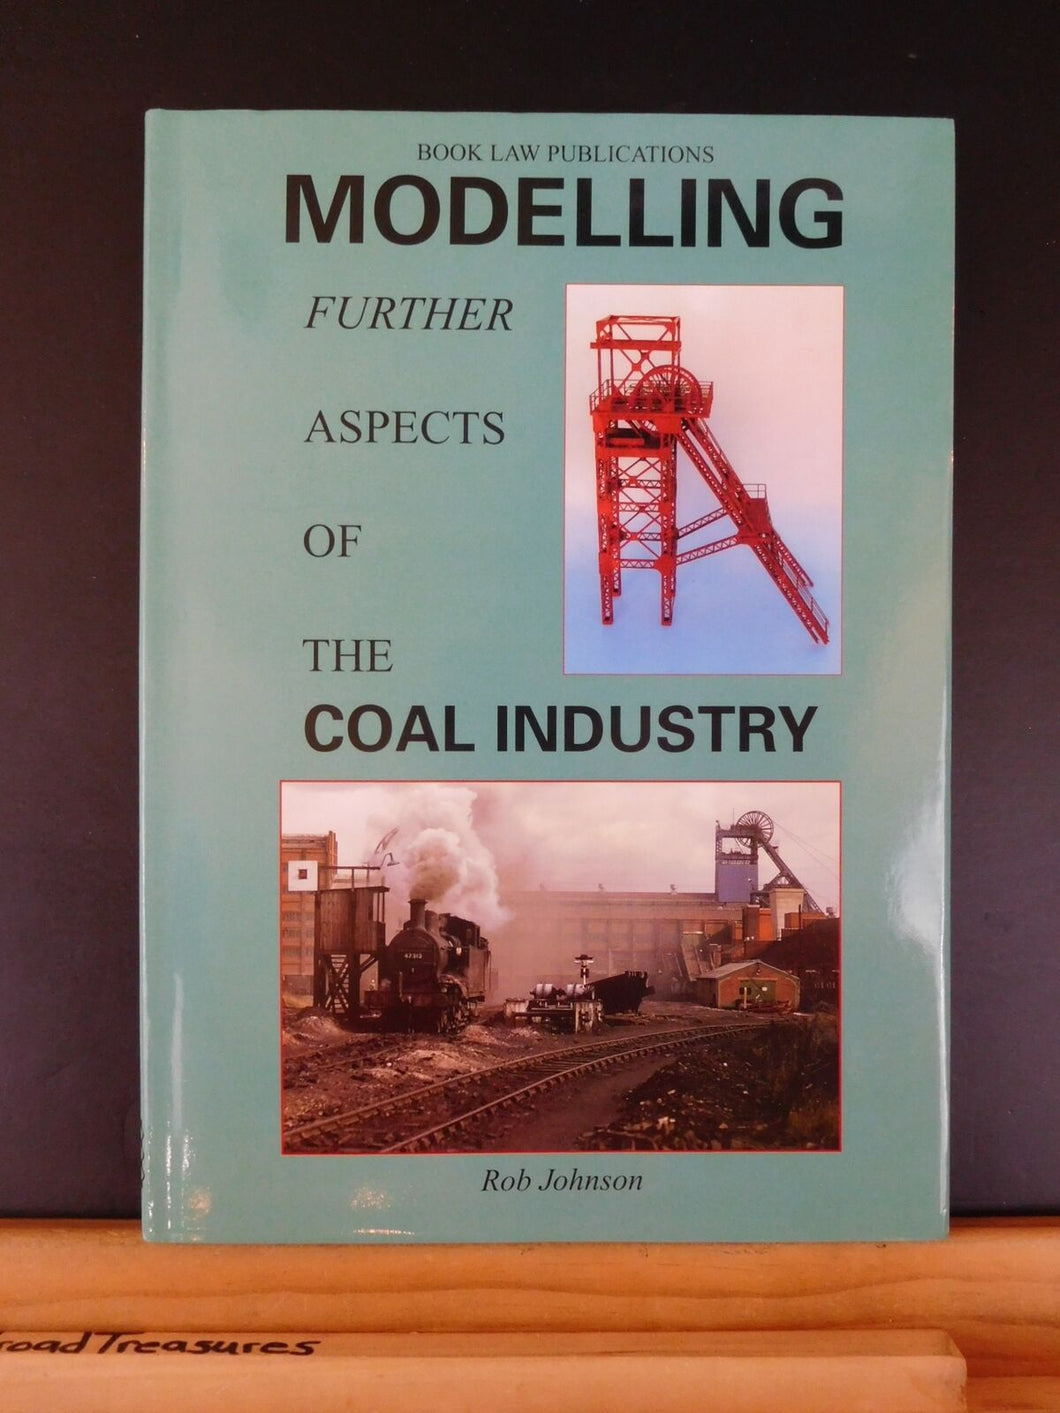 Modelling Further Aspects of the Coal Industry by Rob Johnson